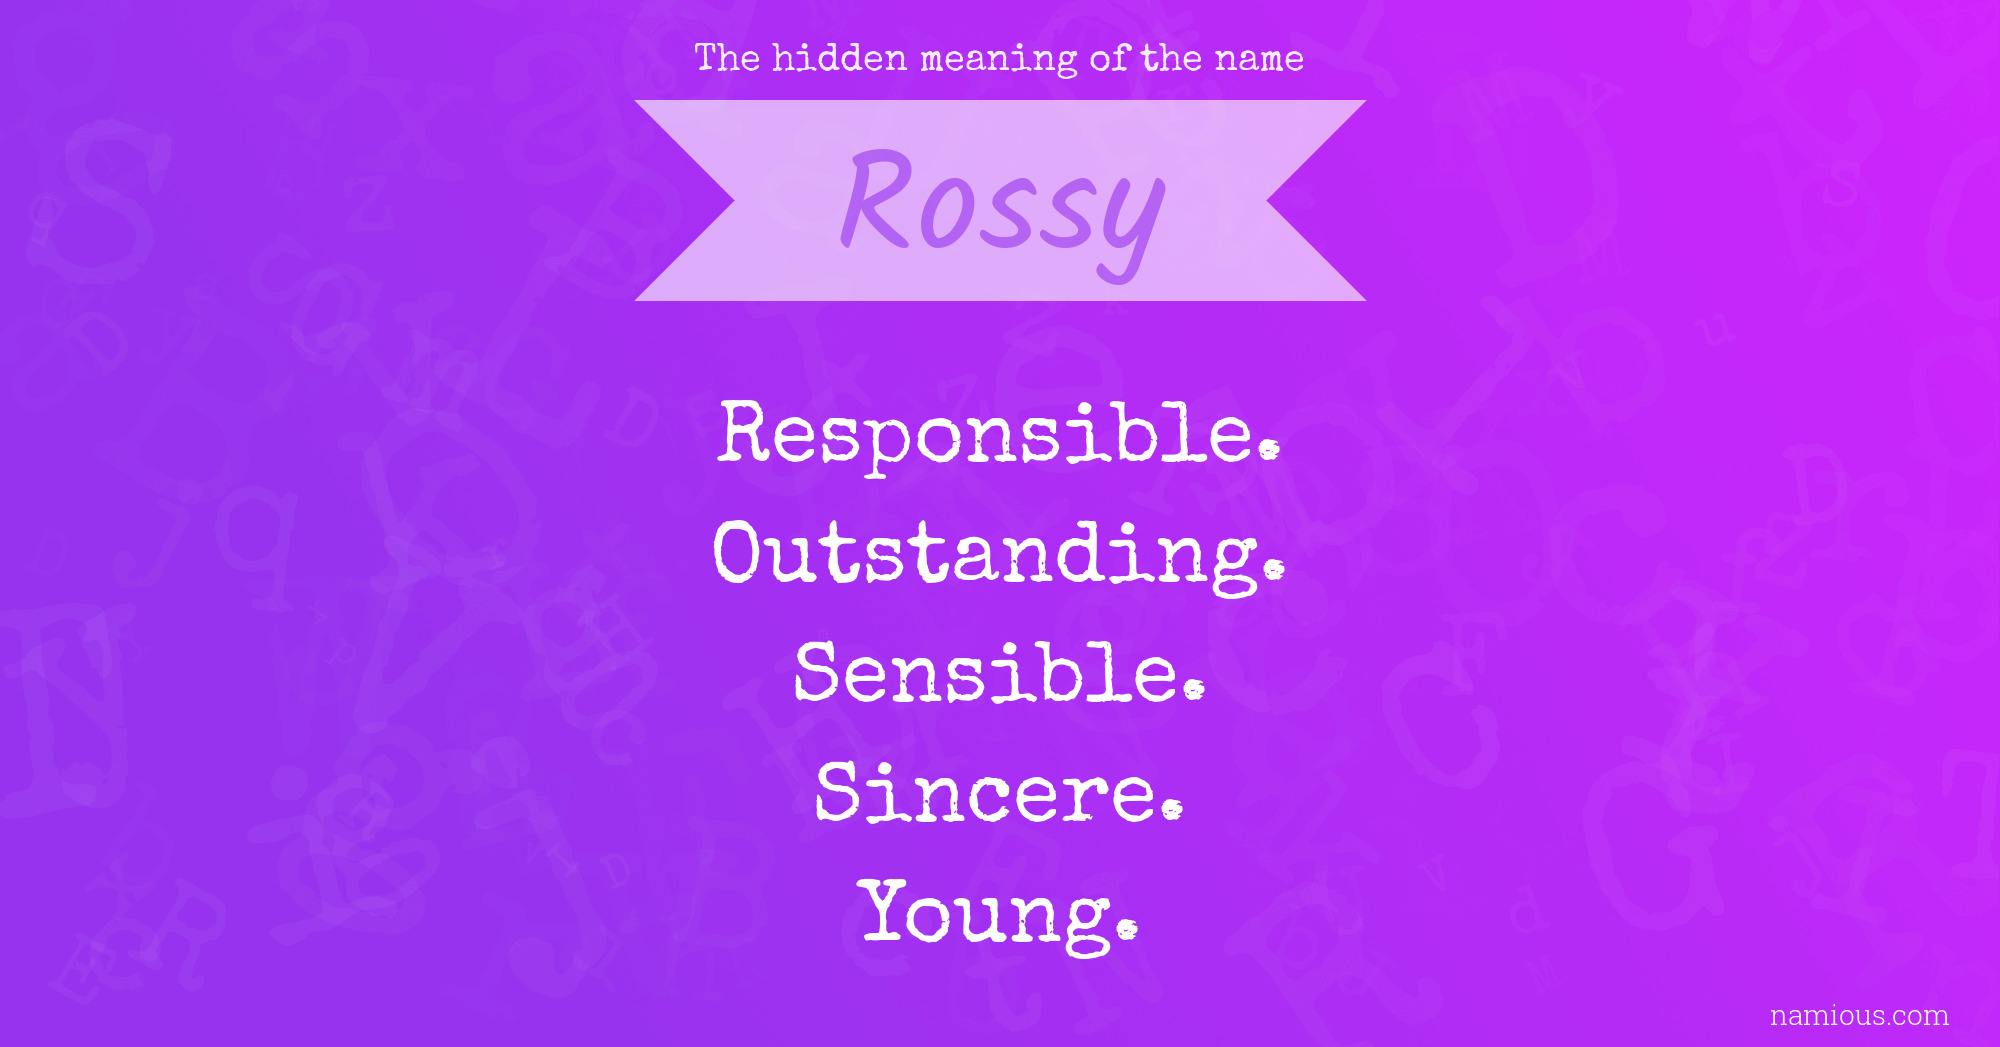 The hidden meaning of the name Rossy